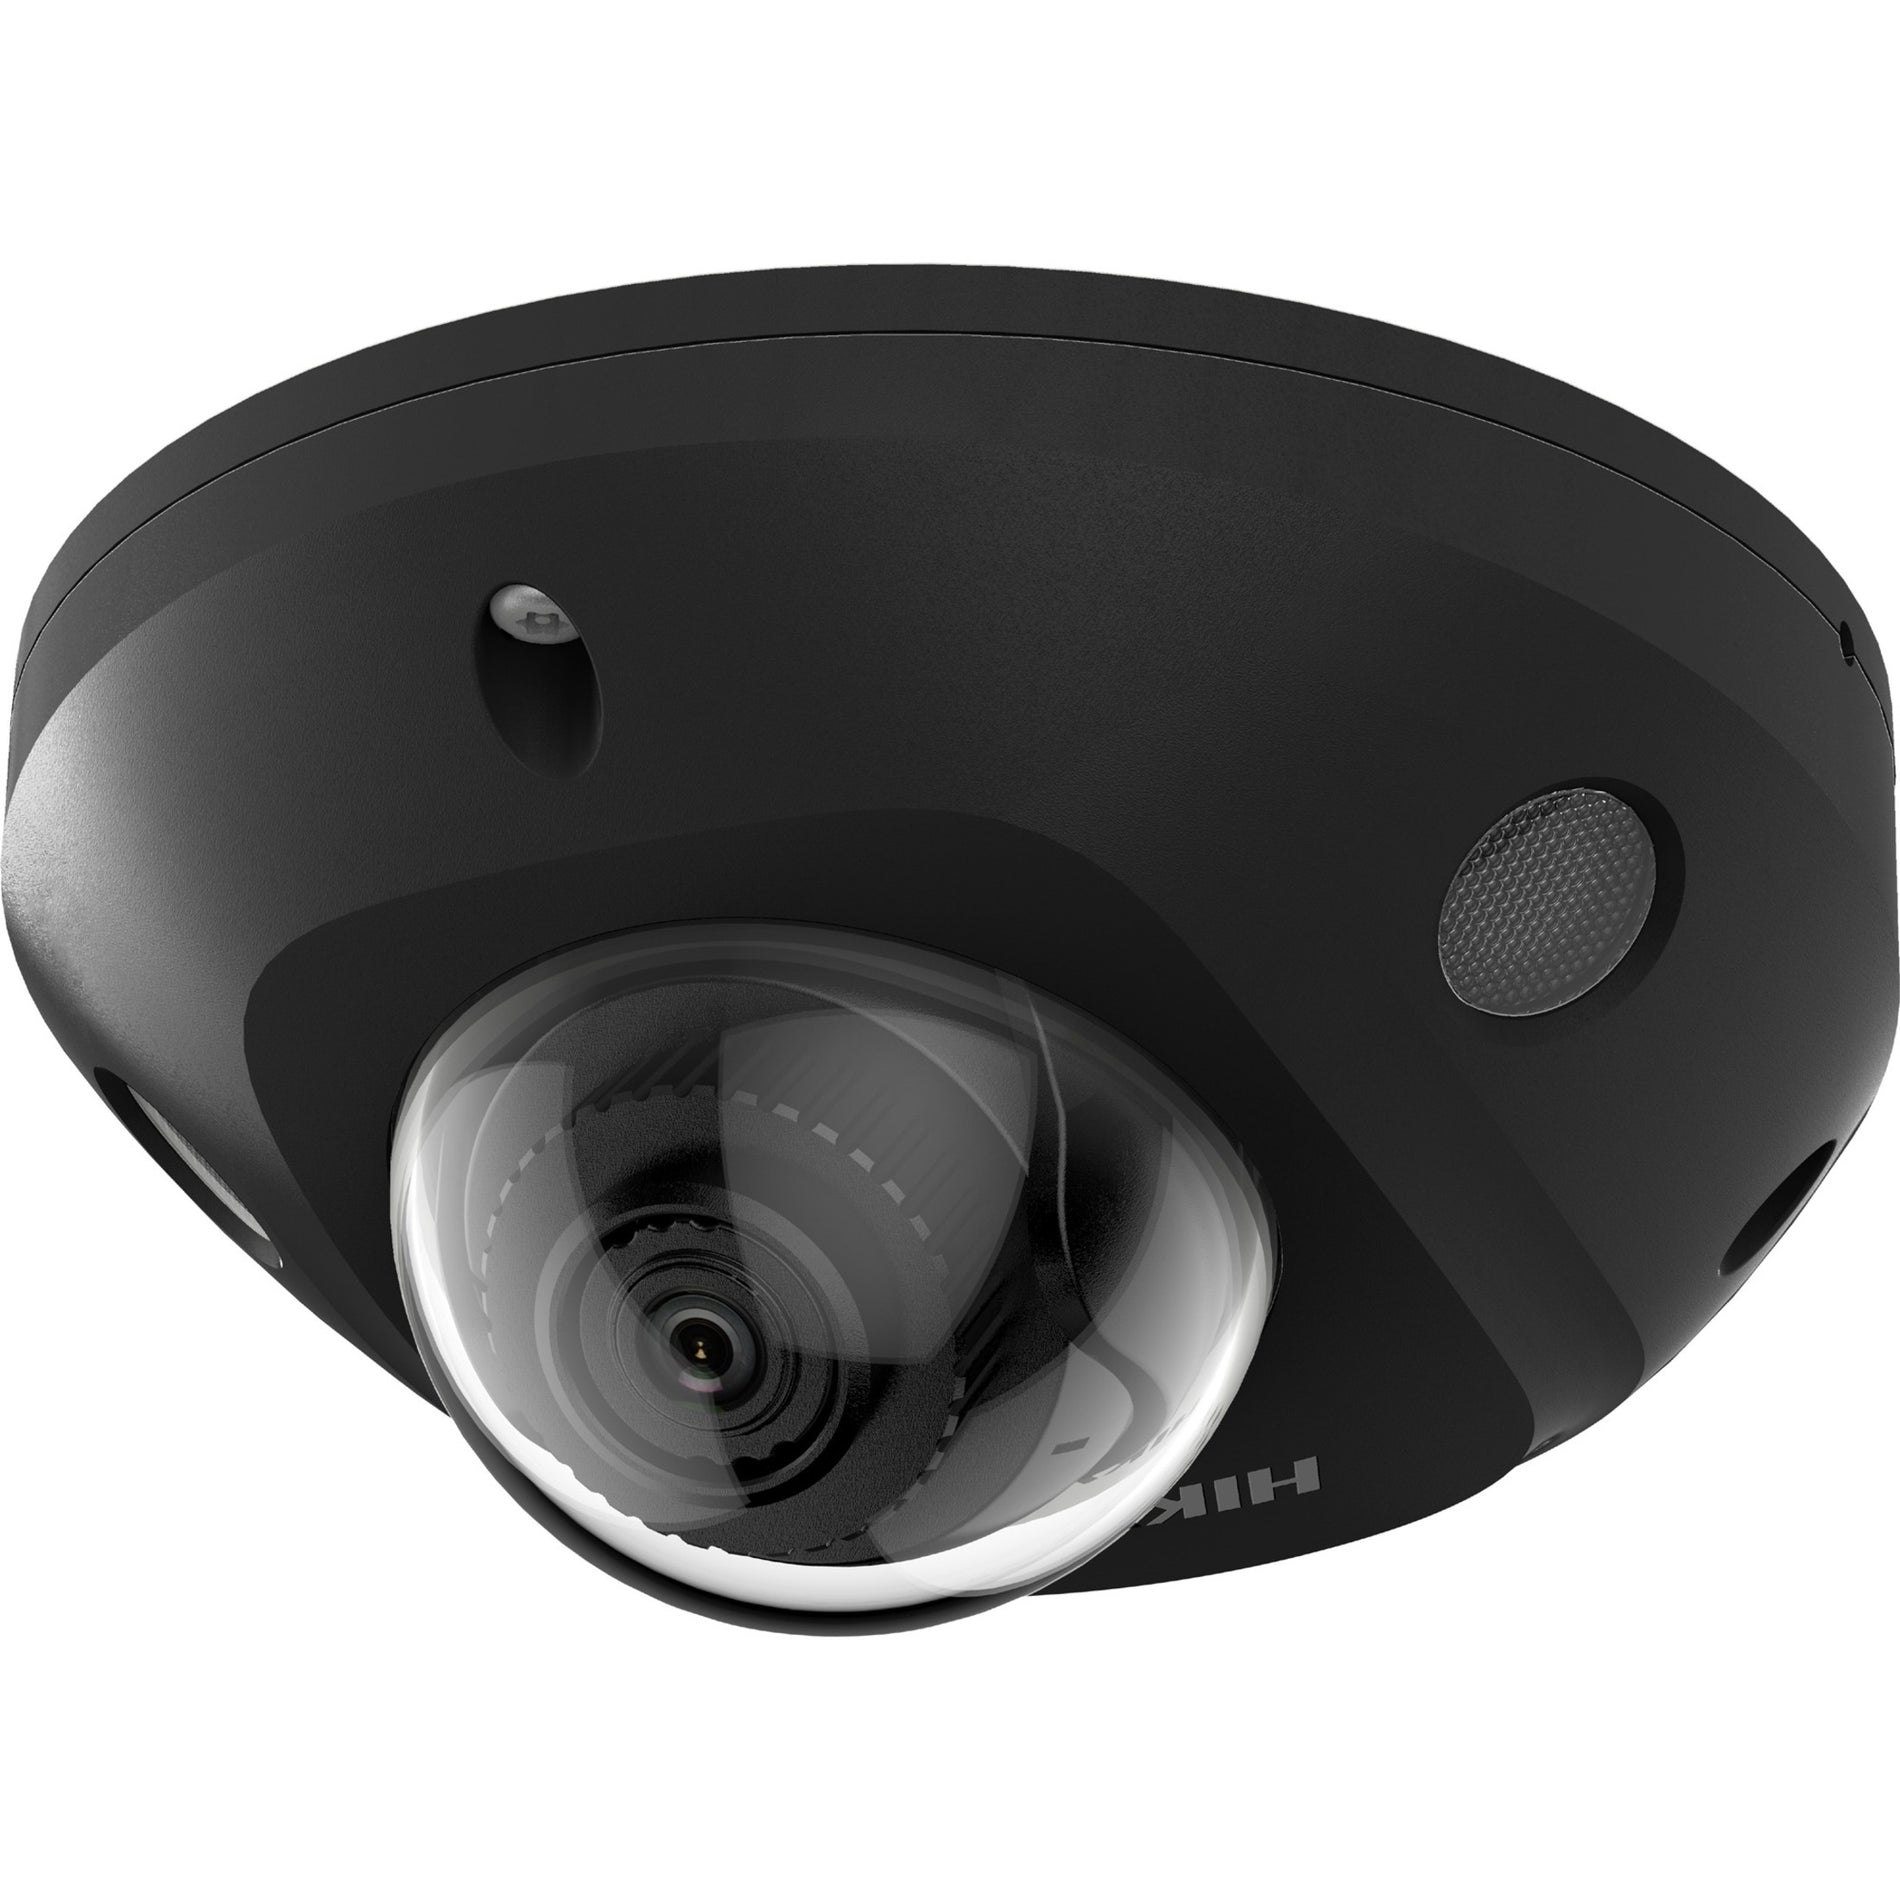 Hikvision DS-2CD2543G2-IS 4MM AcuSense 4 MP Built-in Mic Mini Dome Network Camera, 2688 x 1520, 30 fps, IR Night Vision